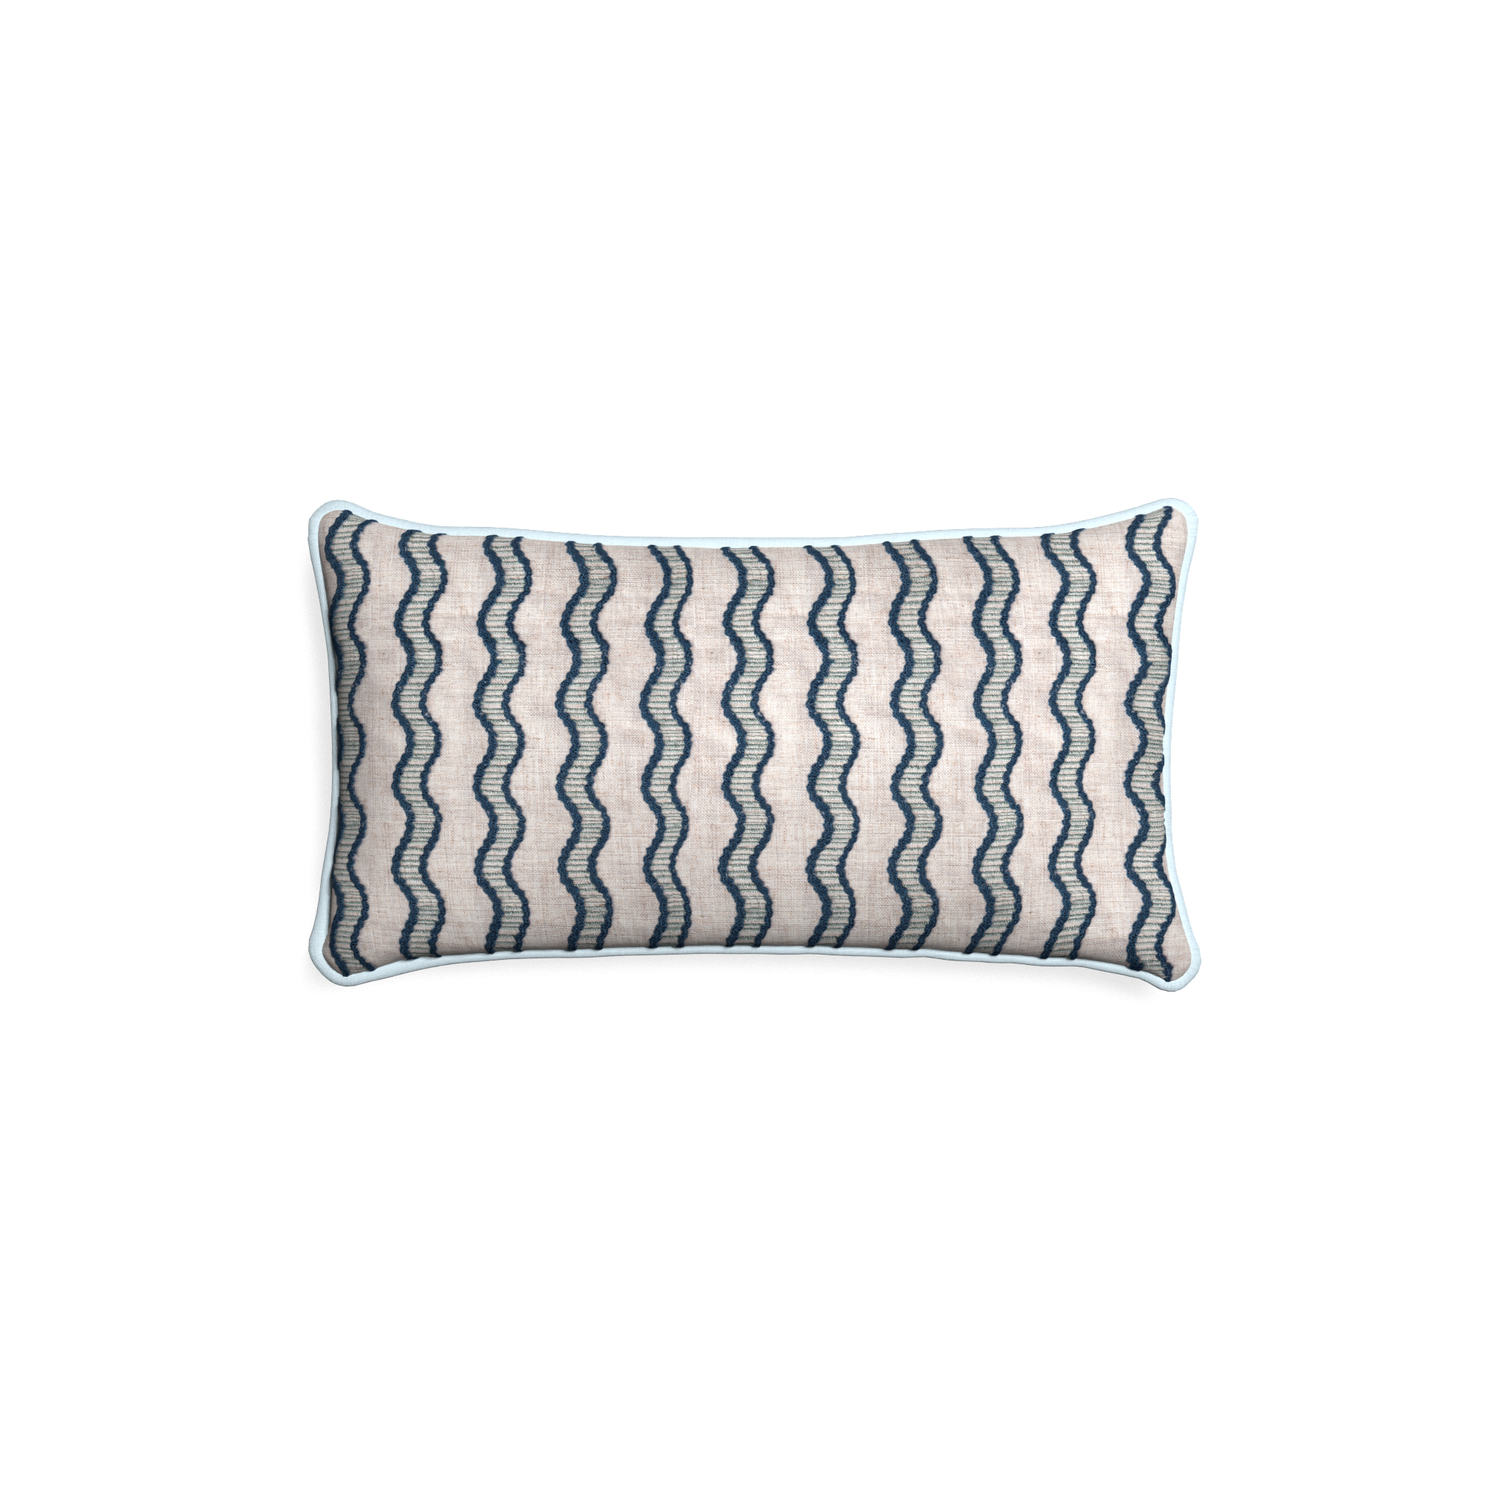 Petite-lumbar beatrice custom embroidered wavepillow with powder piping on white background